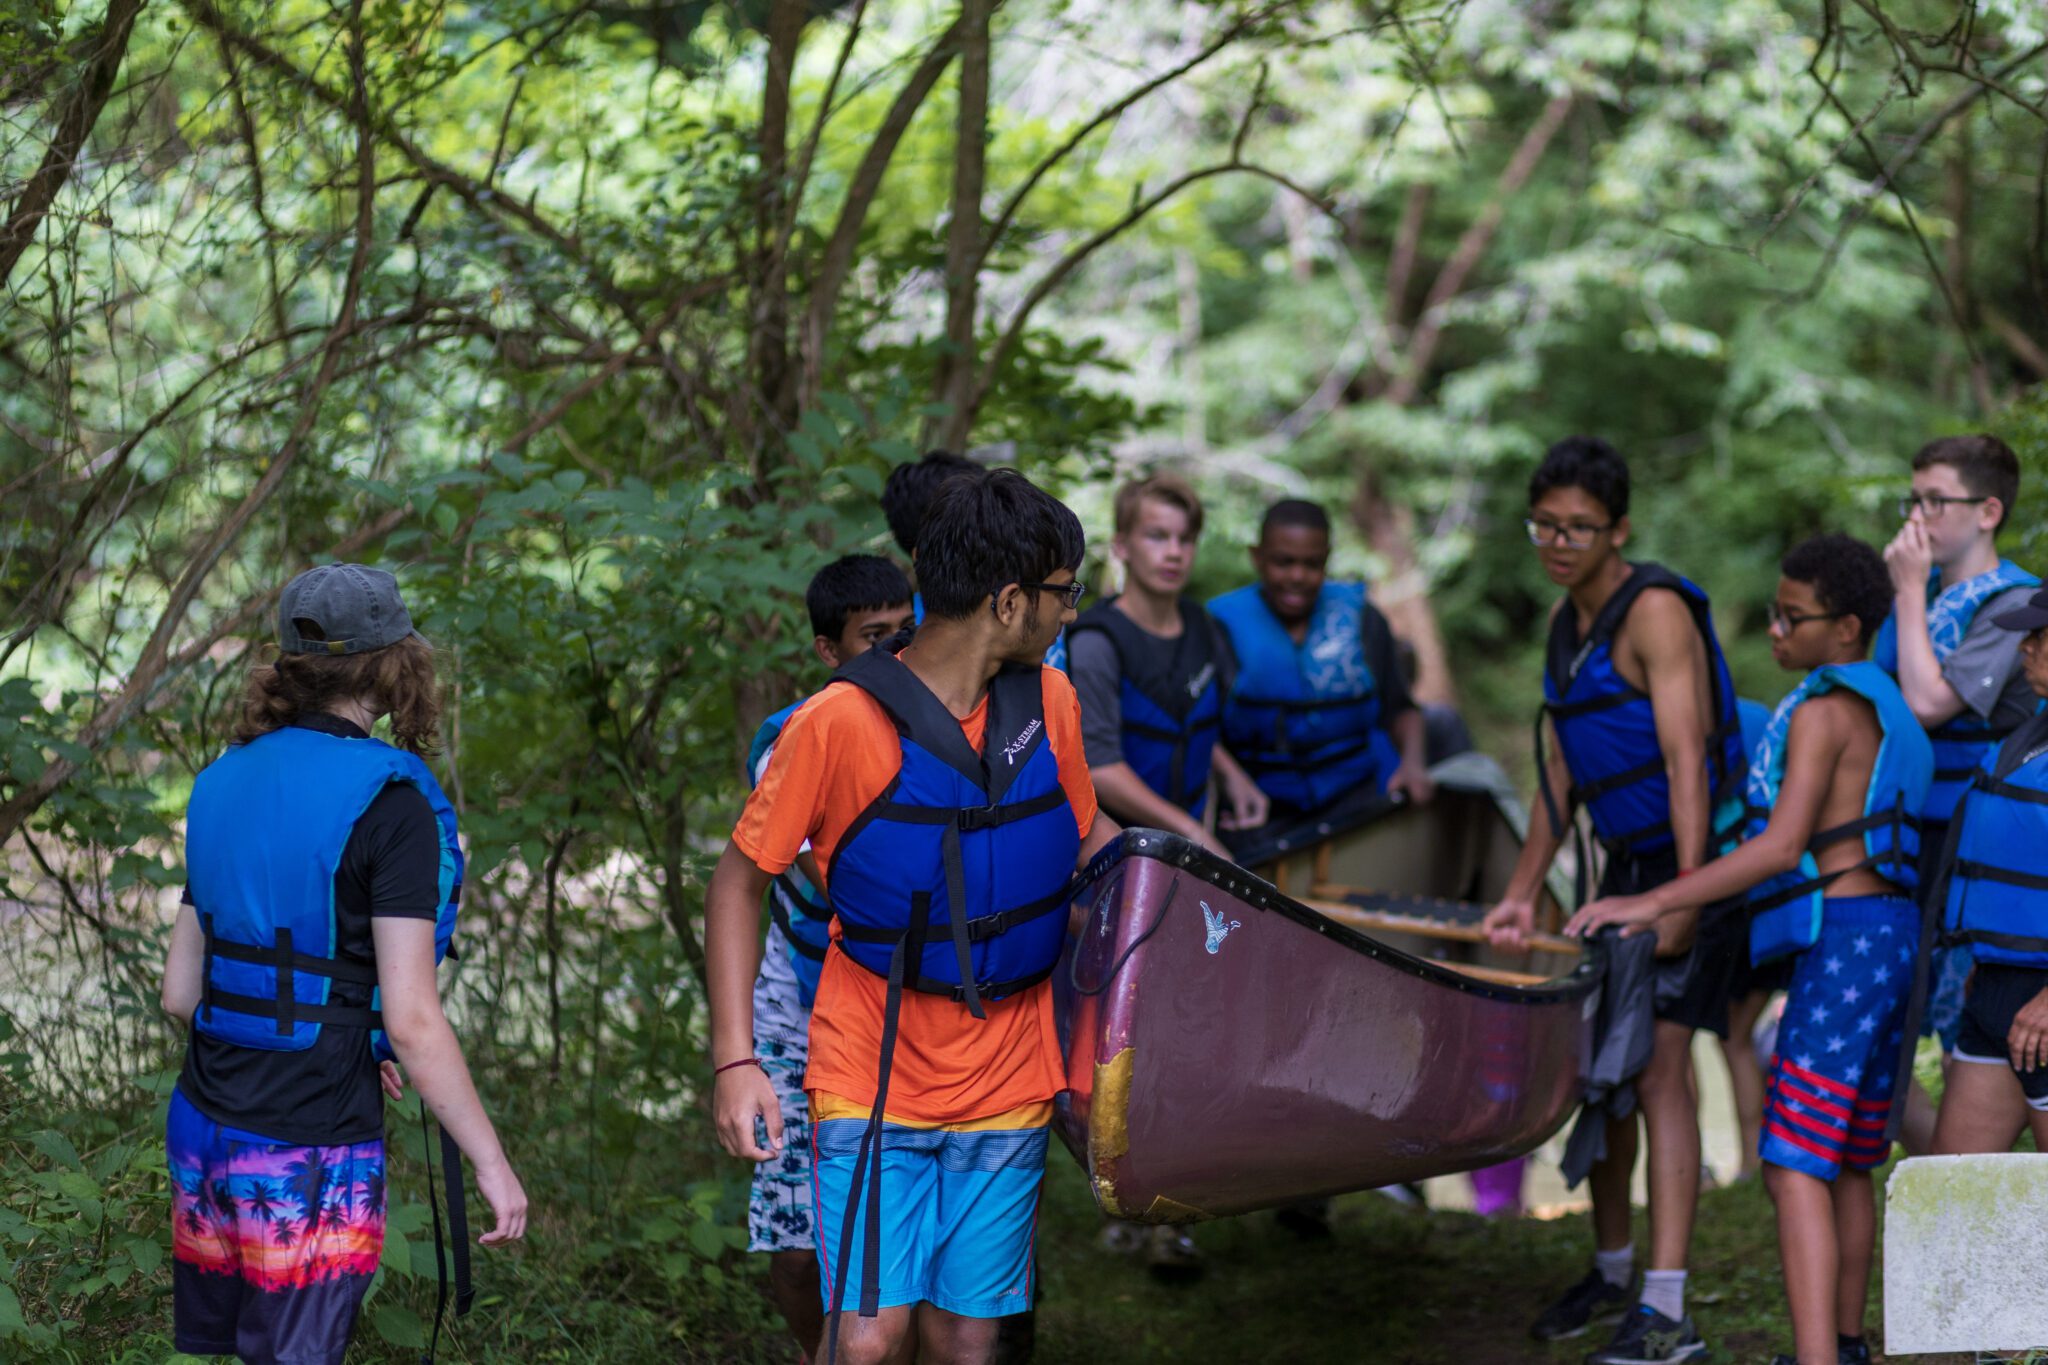 A group of people participating in the P.L.E.D.G.E. Leadership Program venture into the woods with their canoes.